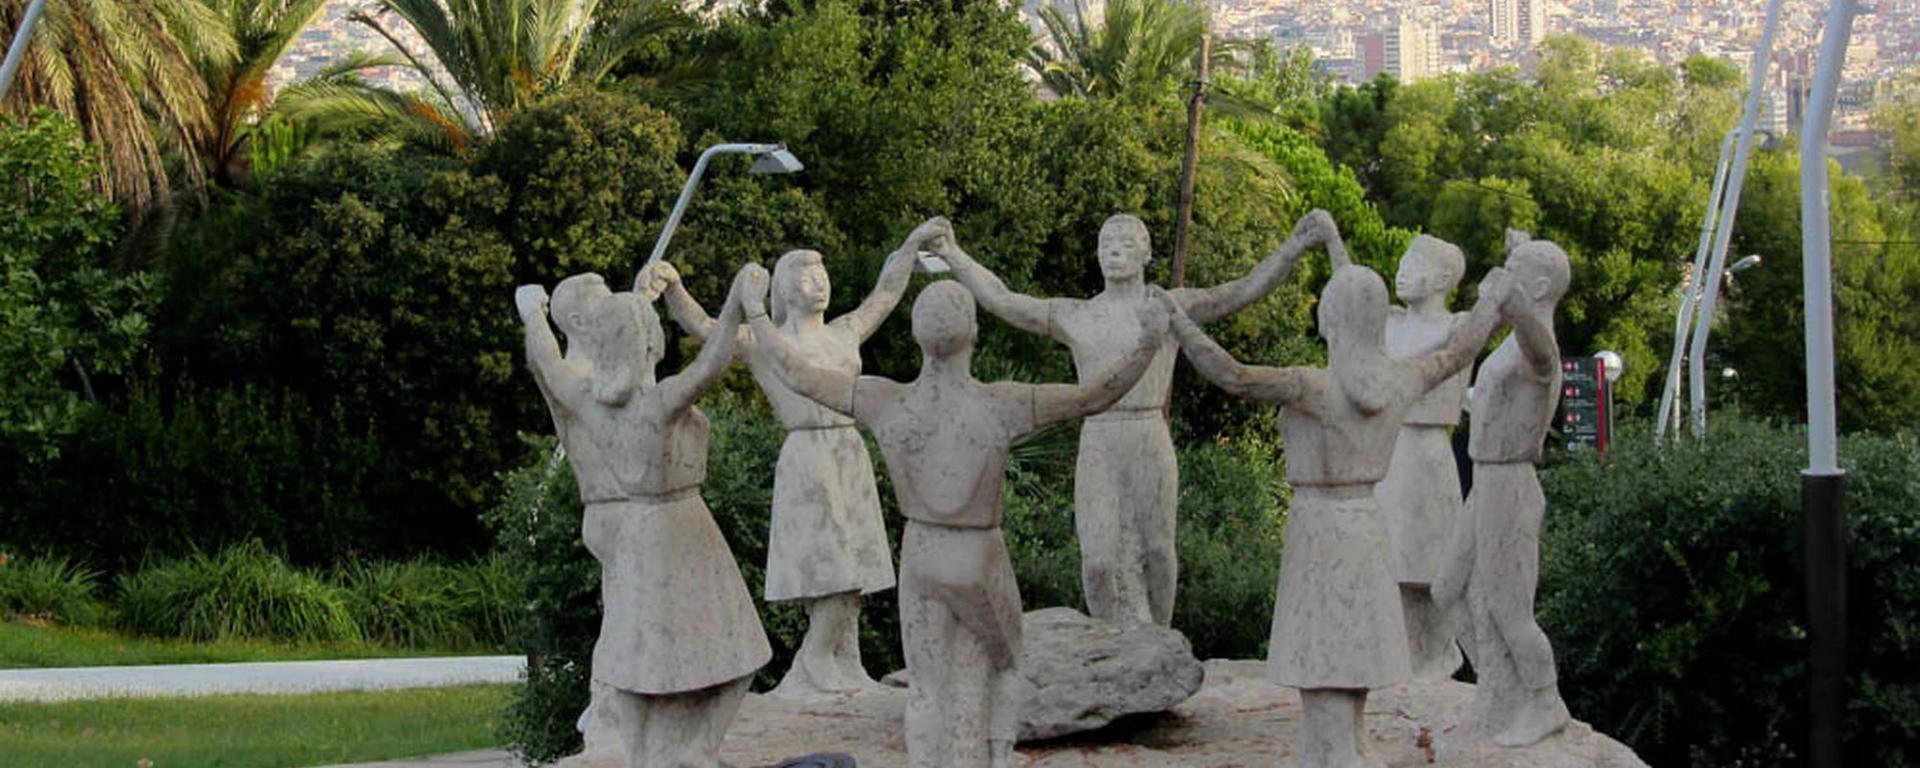 The image is of a stone sculpture of a group of standing people, hands raised and joined in a circle; it is both joyous and just a smidgen distrubing. "Lets Join Hands" by Jocey K is licensed with CC BY-SA 2.0. To view a copy of this license, visit https://creativecommons.org/licenses/by-sa/2.0/ 